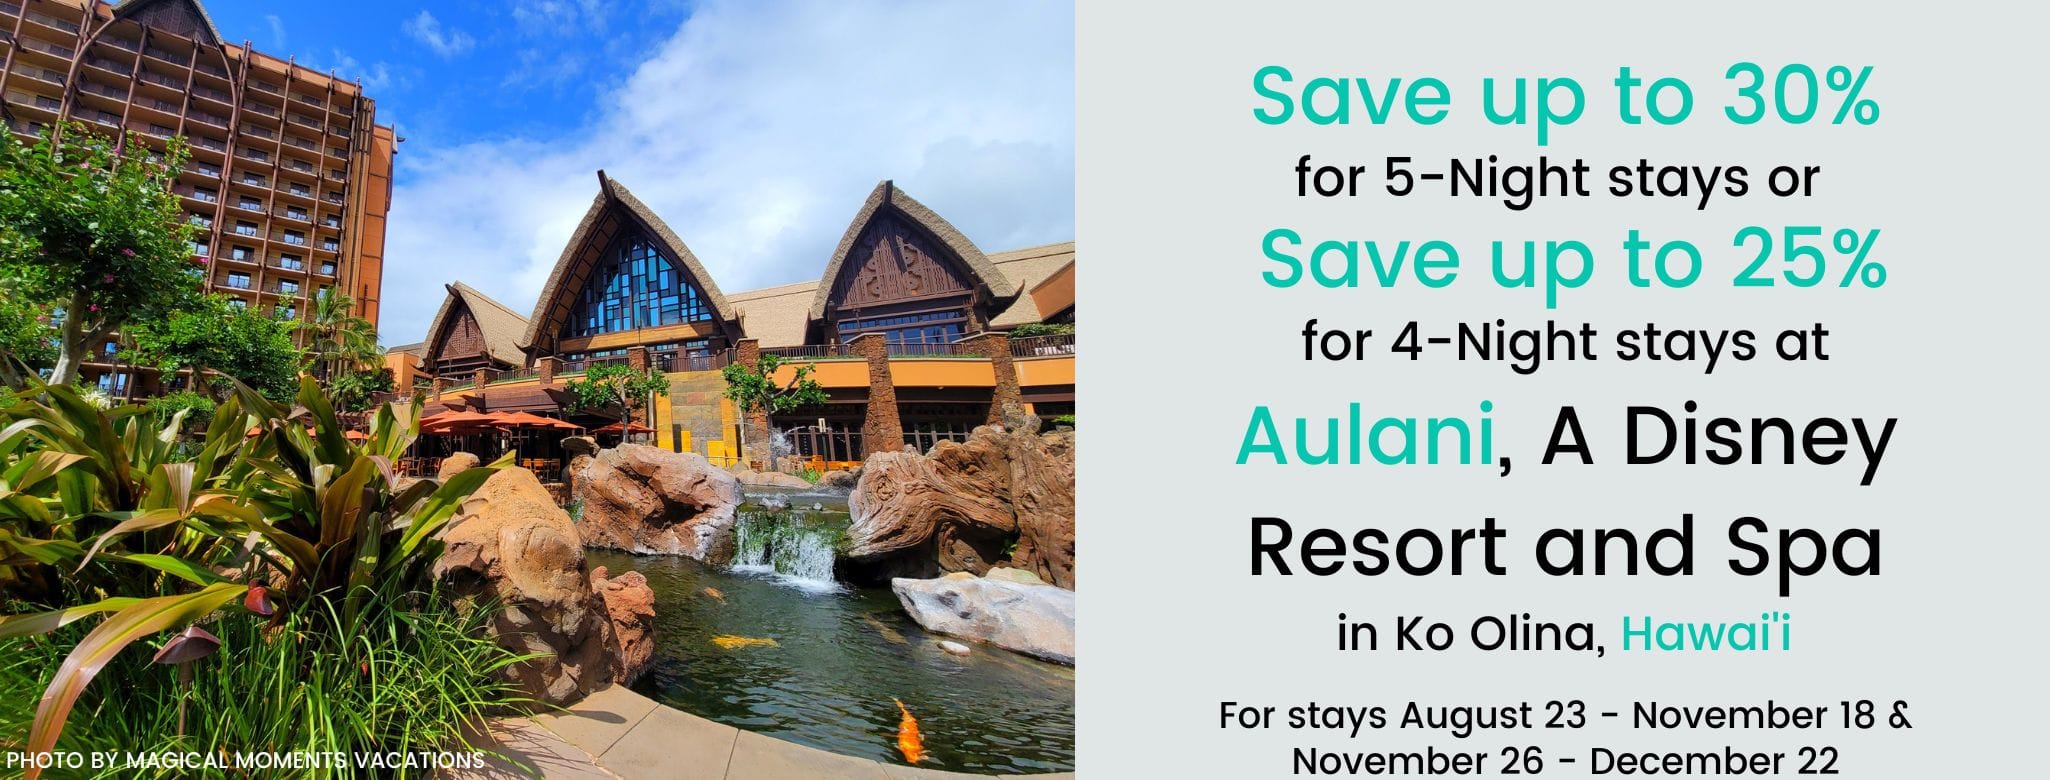 Save up to 30% at Aulani, A Disney Resort and Spa in Hawaii